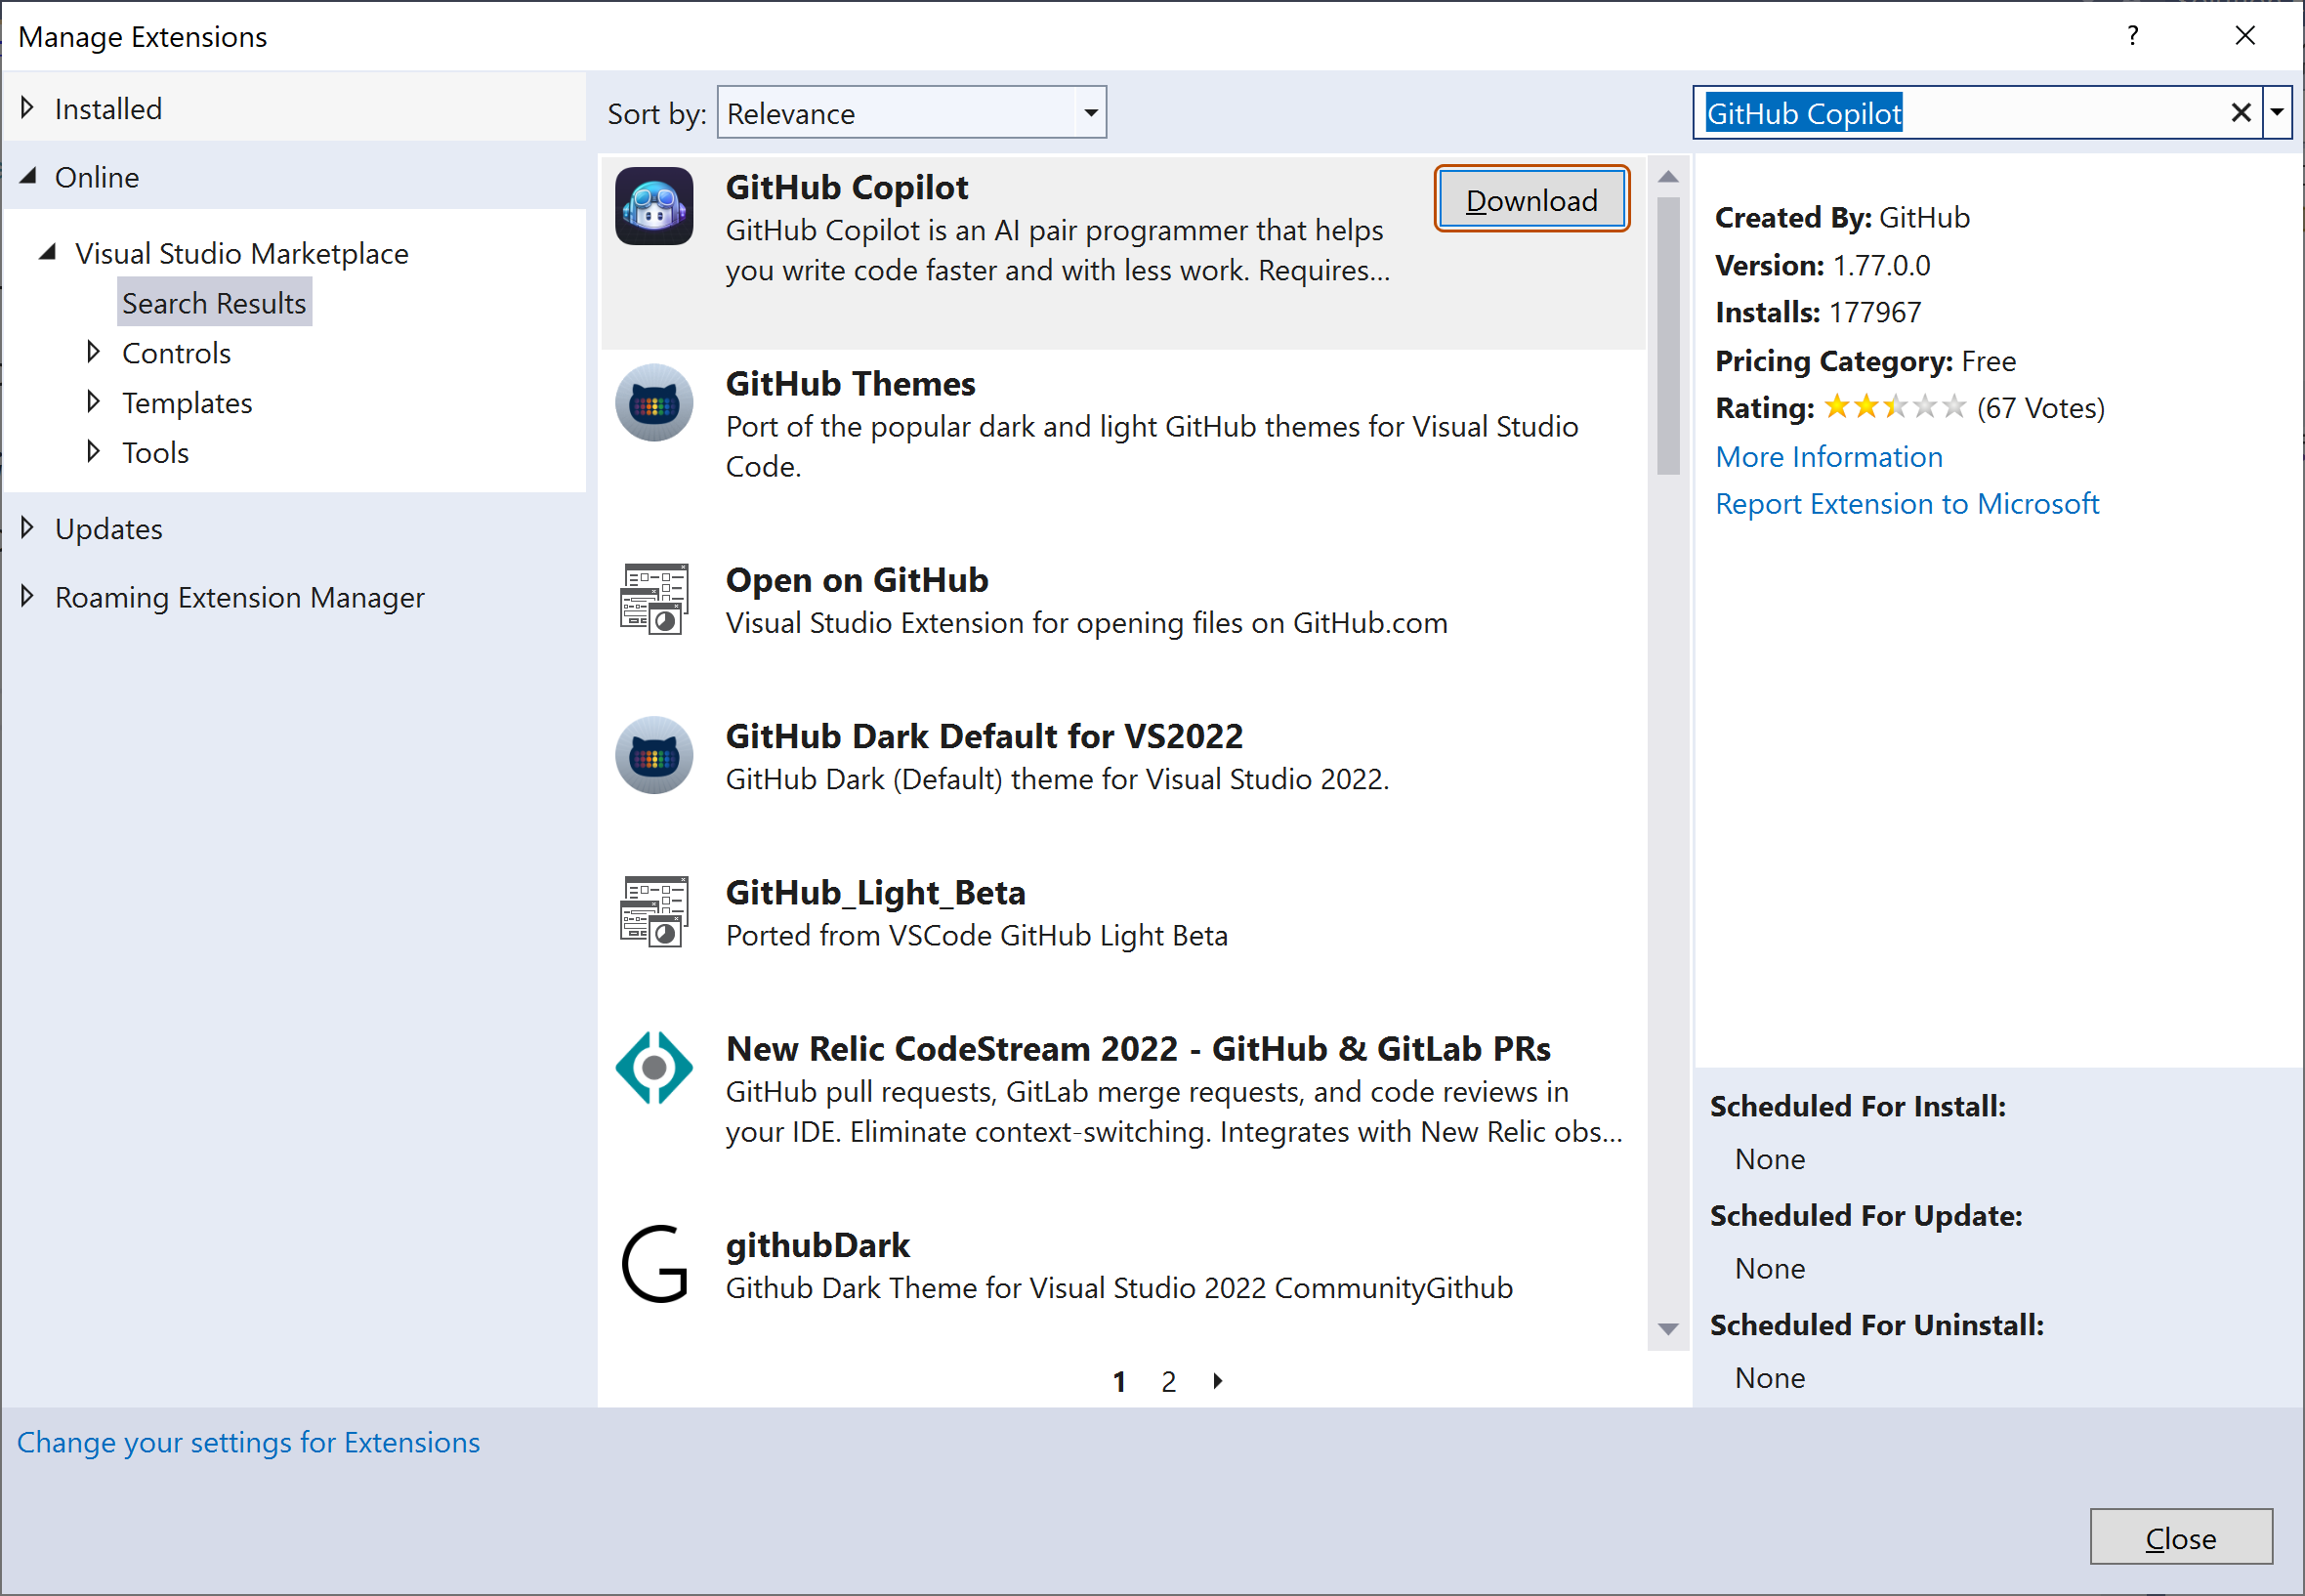 Screenshot of GitHub Copilot extension for Visual Studio with the download button emphasized